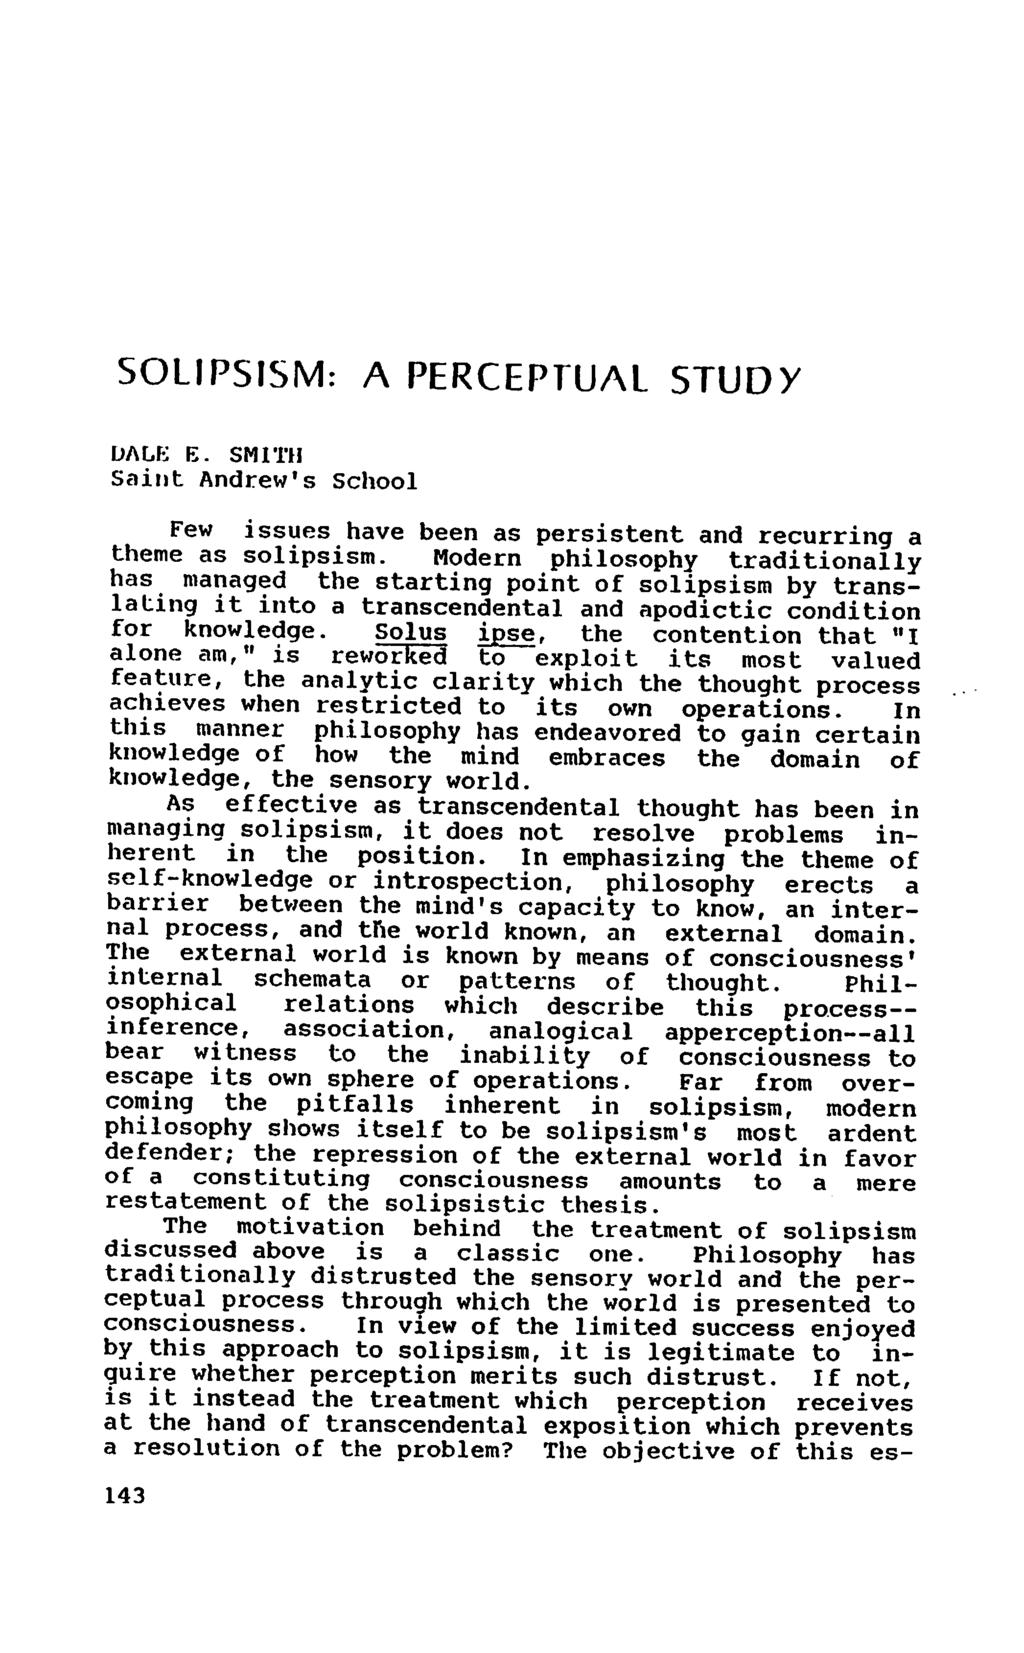 SOLIPSISM: A PERCEPTUAL STUDY DALE E. SMITH Saint Andrew's School Few issues have been as persistent and recurring a theme as solipsism.